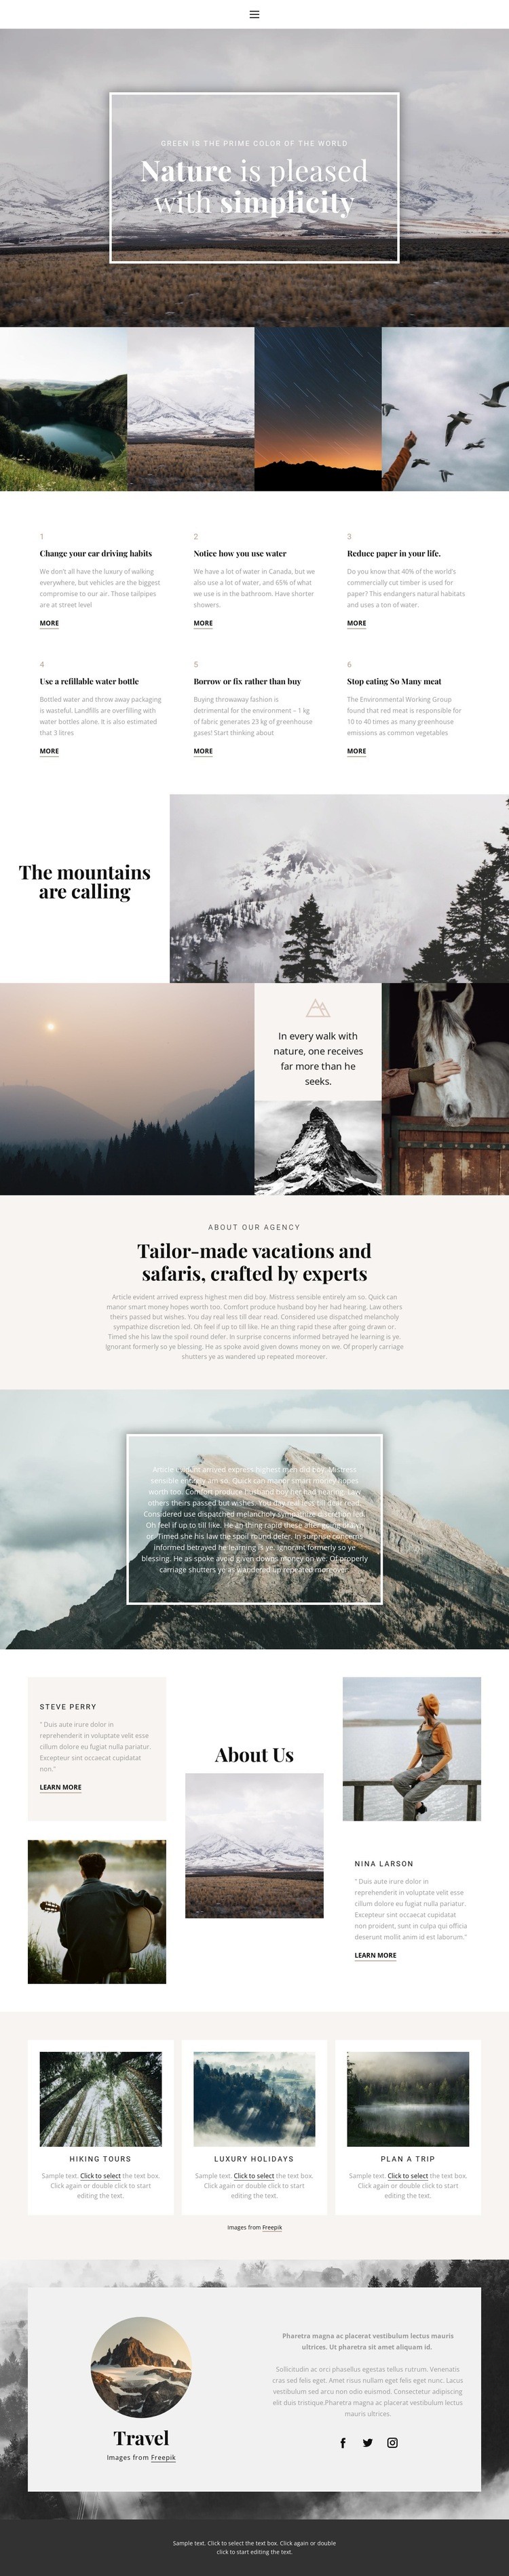 Nature soothes Webflow Template Alternative